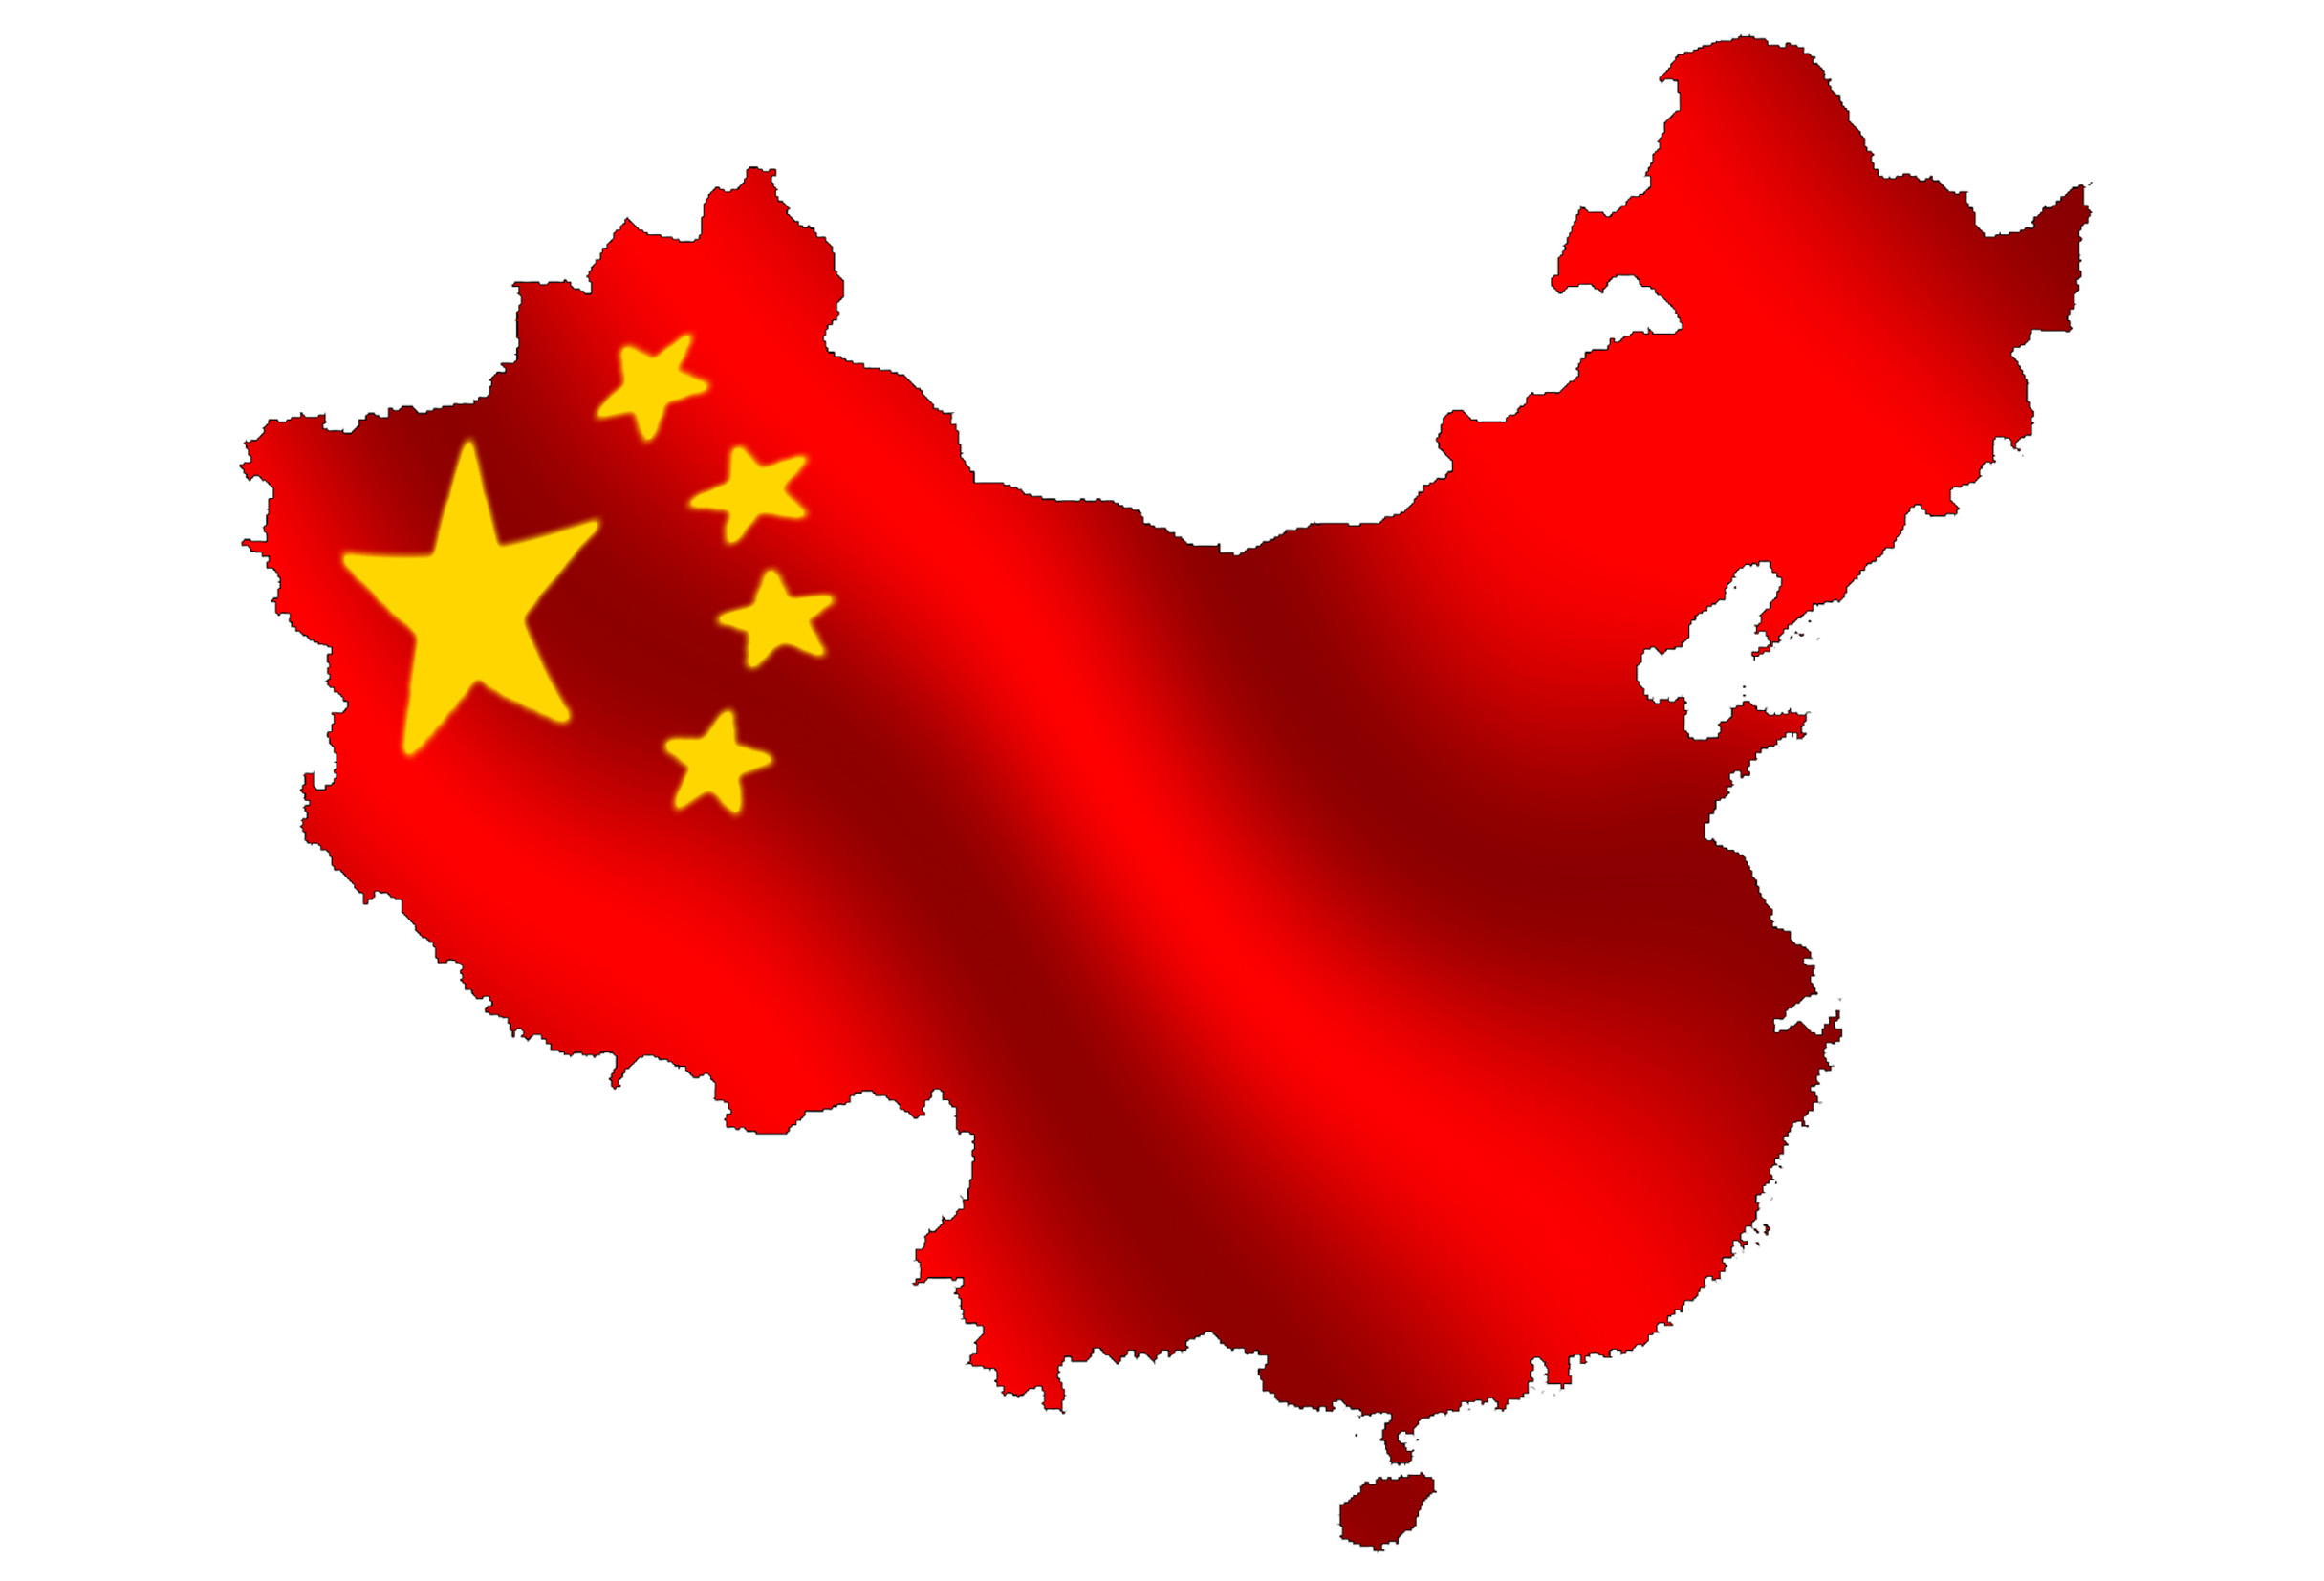 China Flag - ClipArt Best